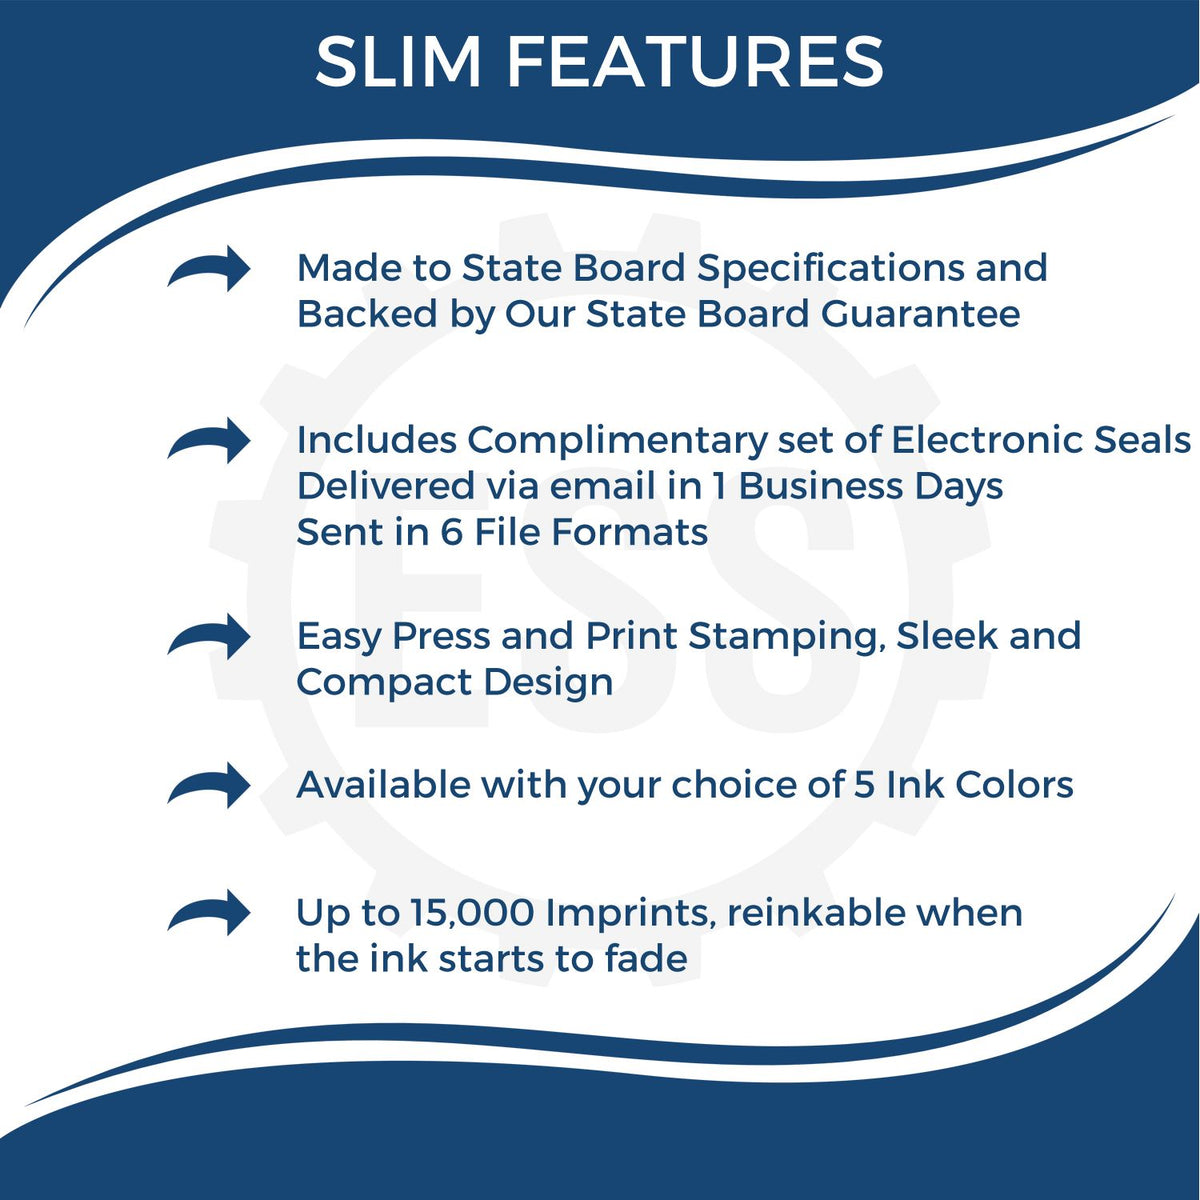 A picture of an infographic highlighting the selling points for the Super Slim Washington Notary Public Stamp